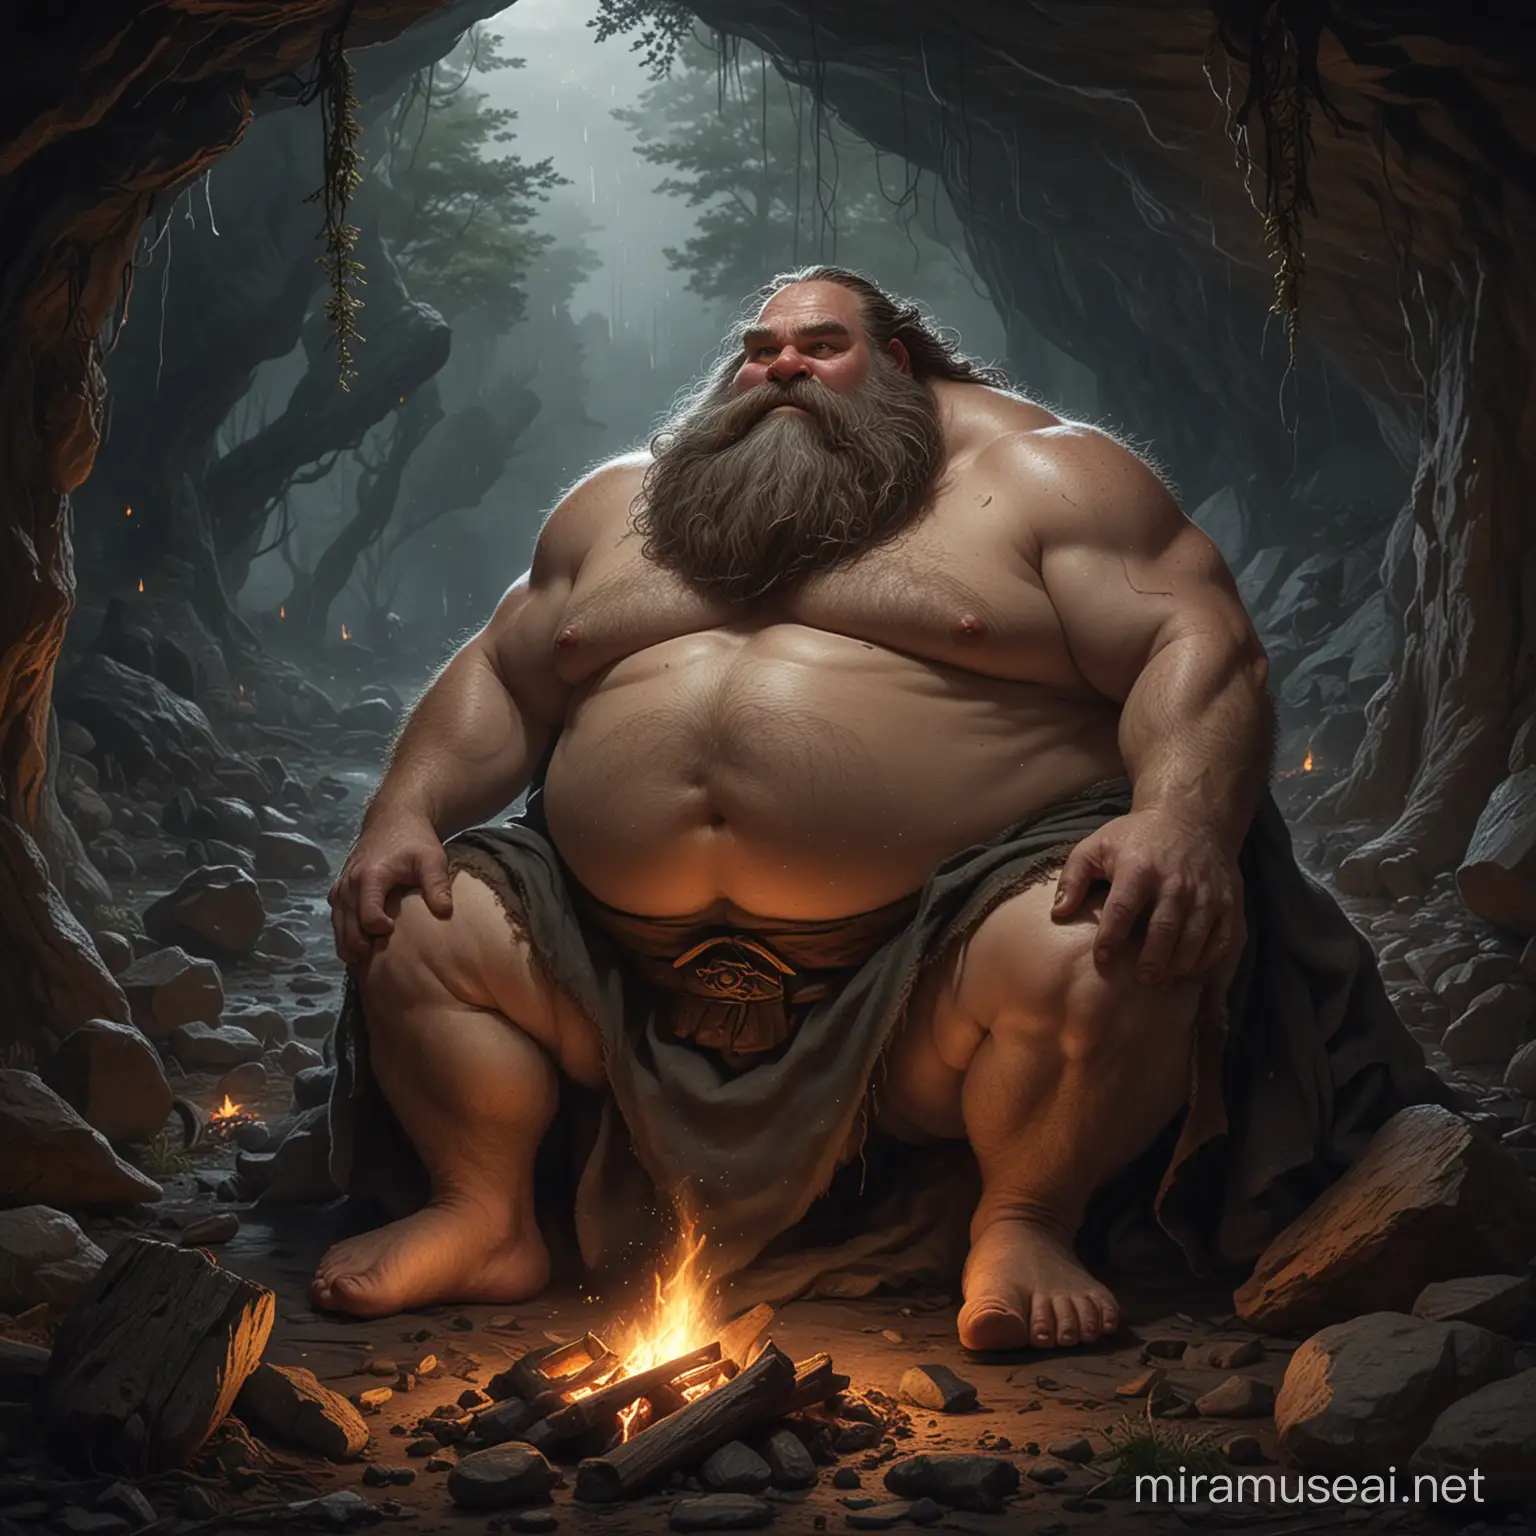 dwarf,forest cave,at midnight,bonfire,gigantic feet,thick feet,rough soles,loincloth,primitive,hairy,dumpy,chubby,shorty,long beard,rainy,lying on the ground,belly towards sky
